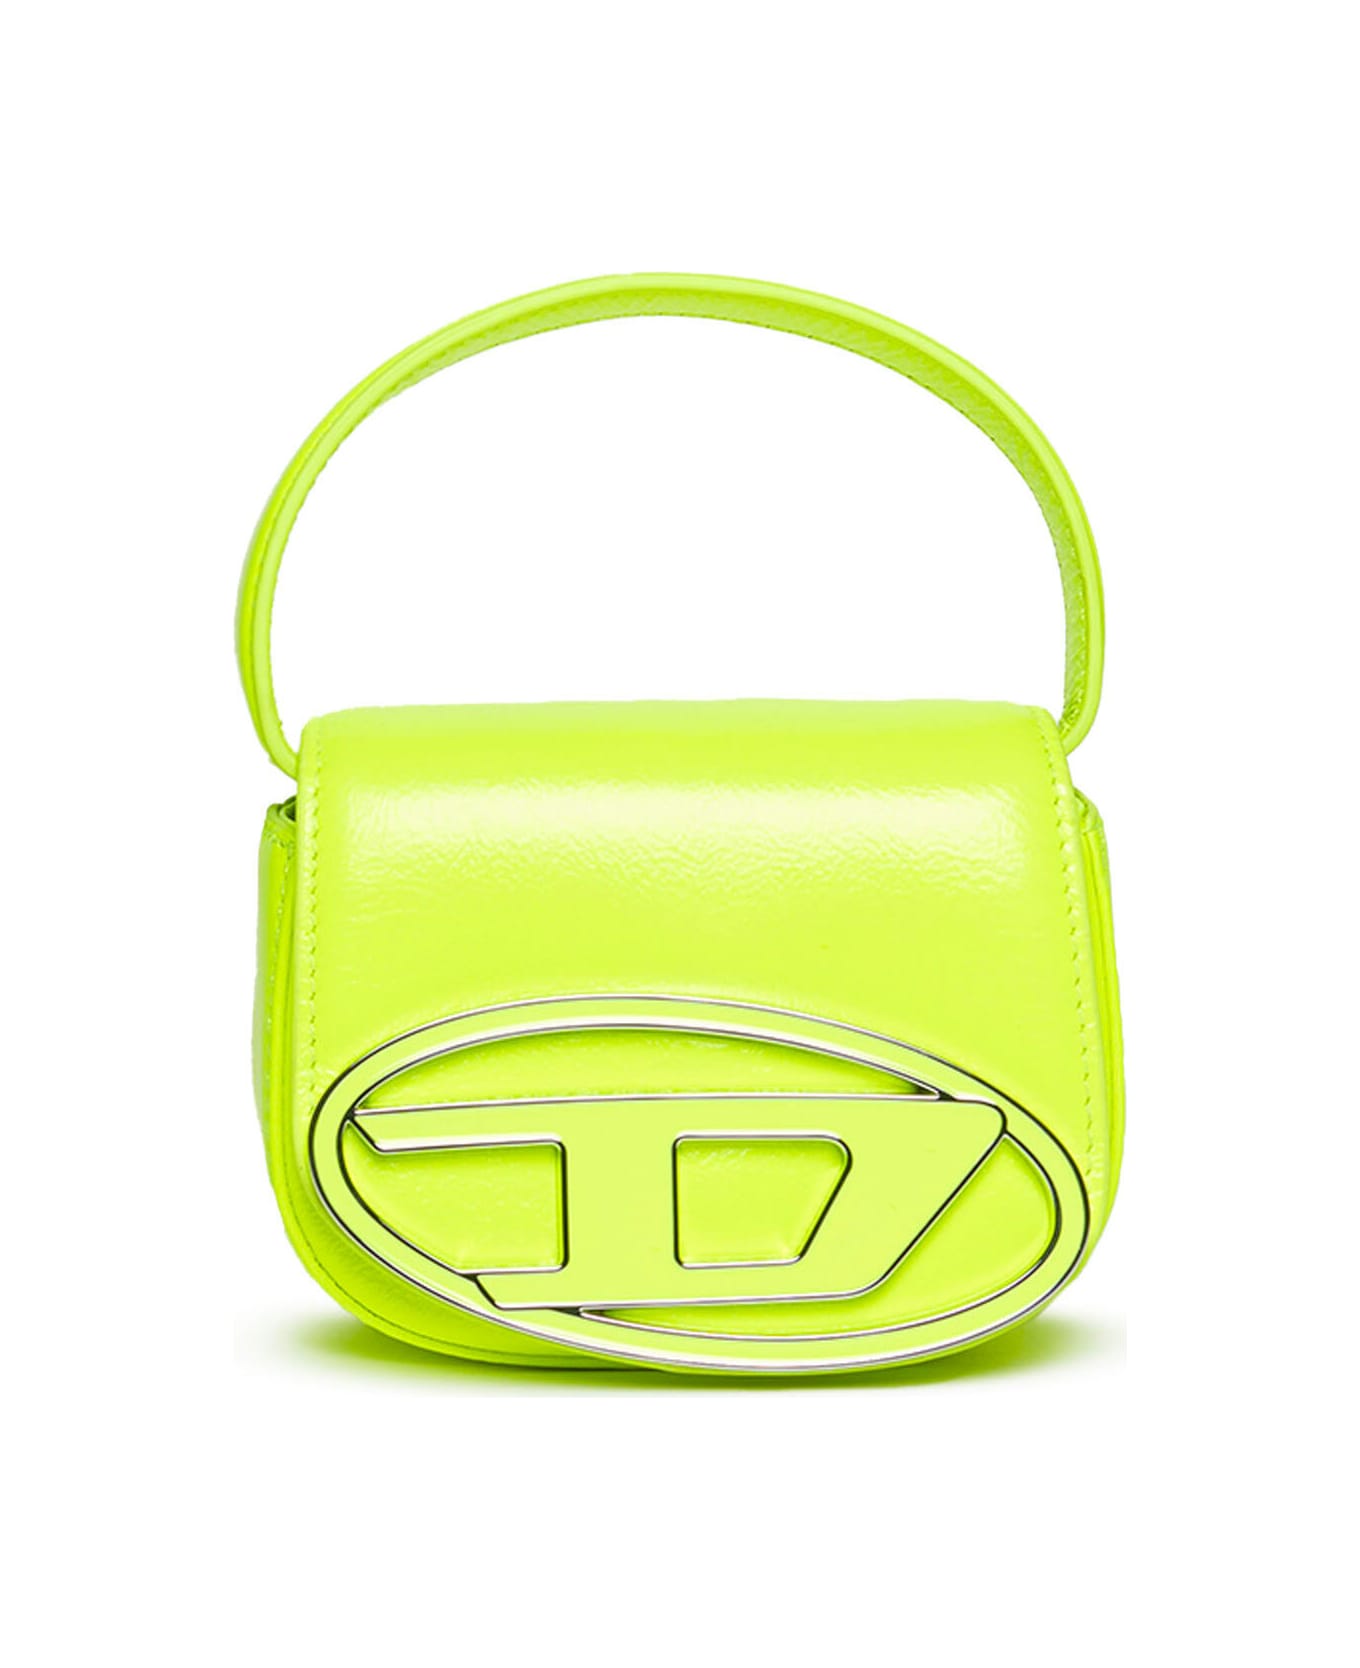 Diesel 1dr Xs Bags Diesel 1dr Xs Bag In Fluo Imitation Leather - Yellow アクセサリー＆ギフト